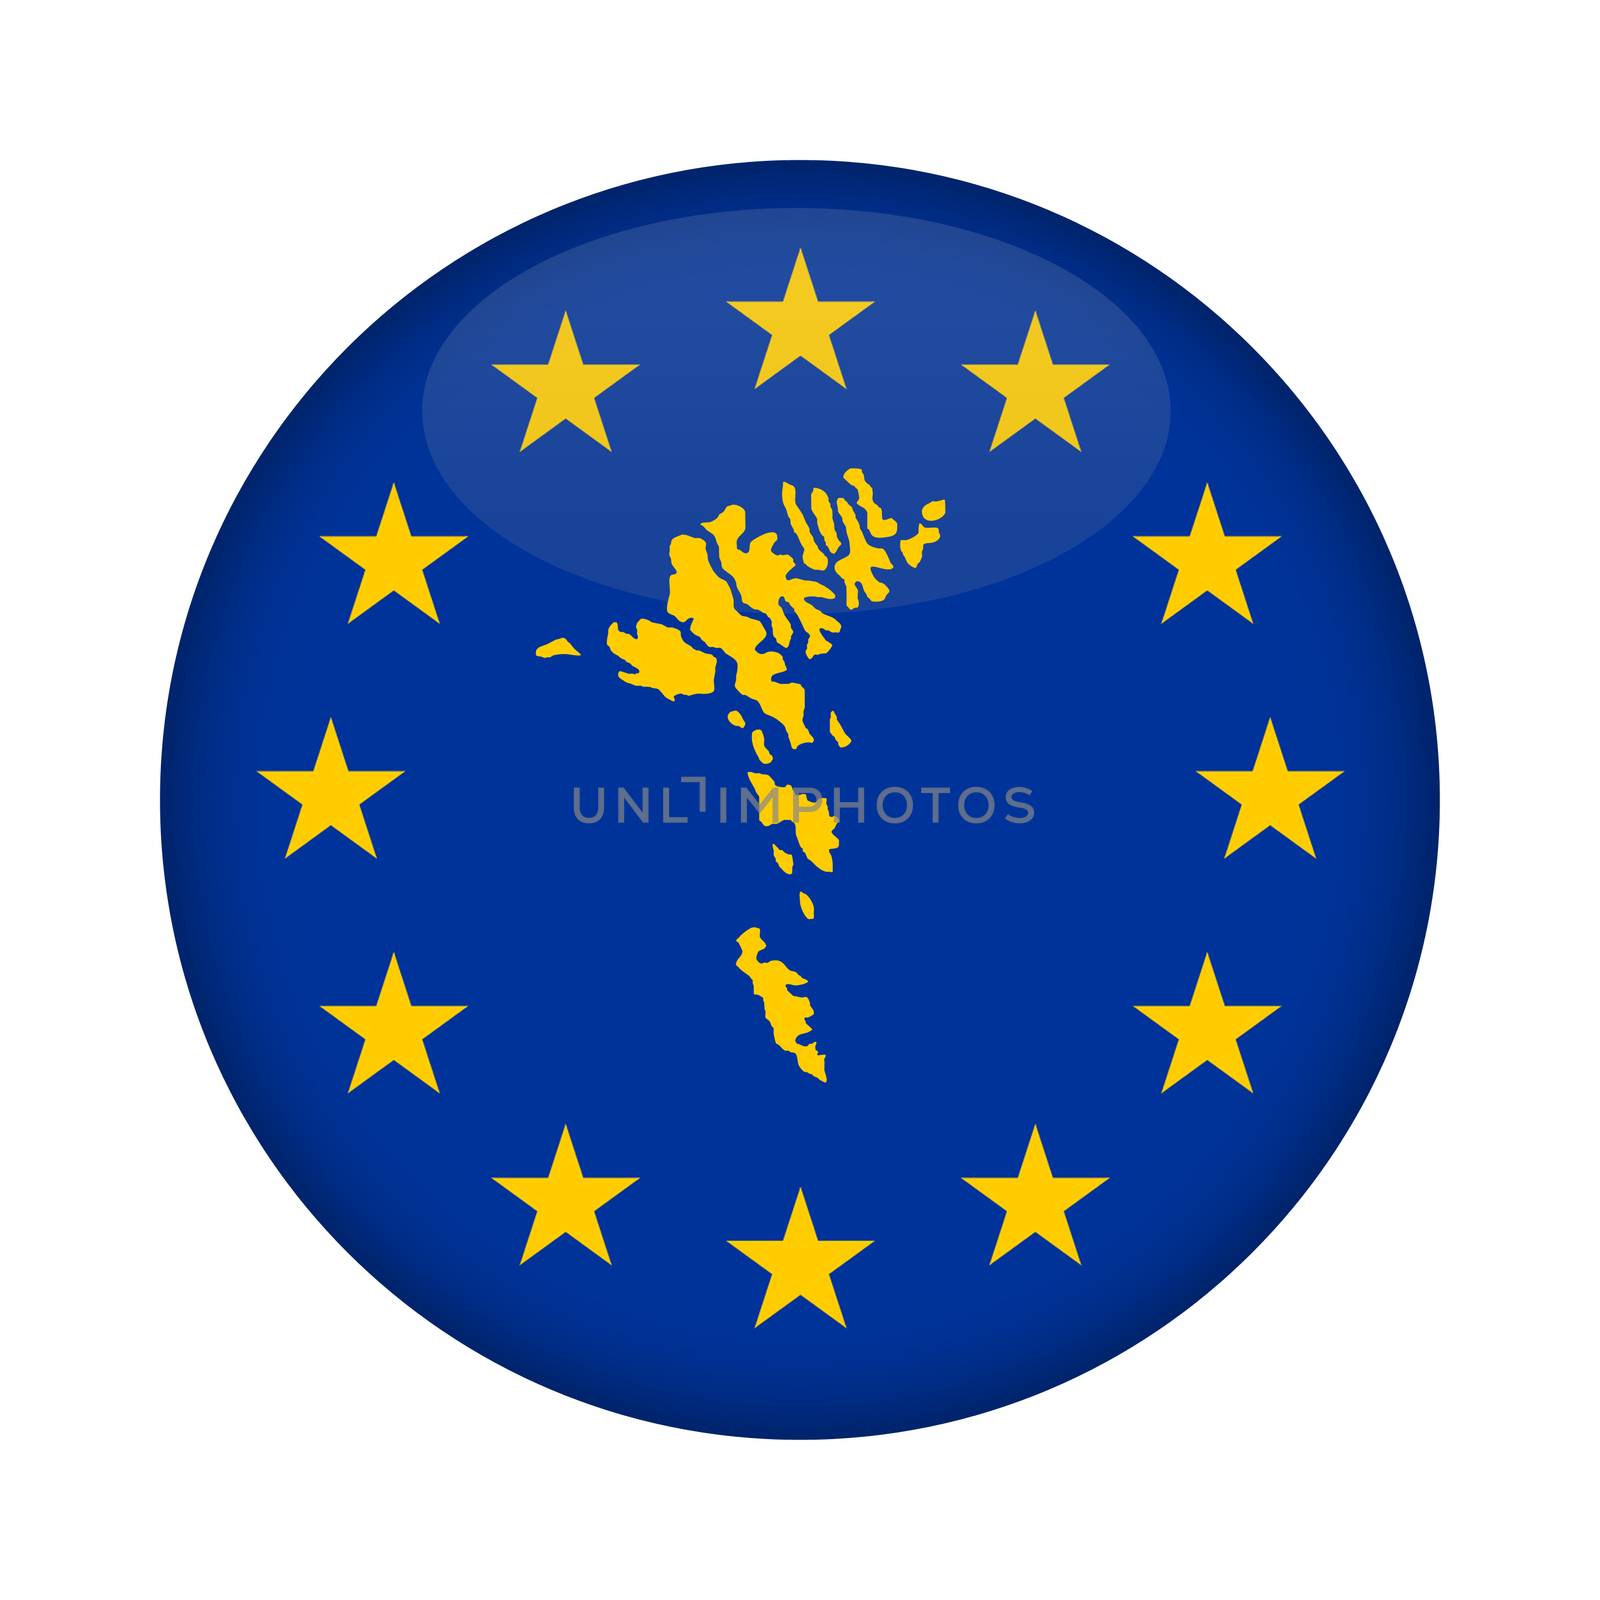 Faroe Islands map on a European Union flag button isolated on a white background.